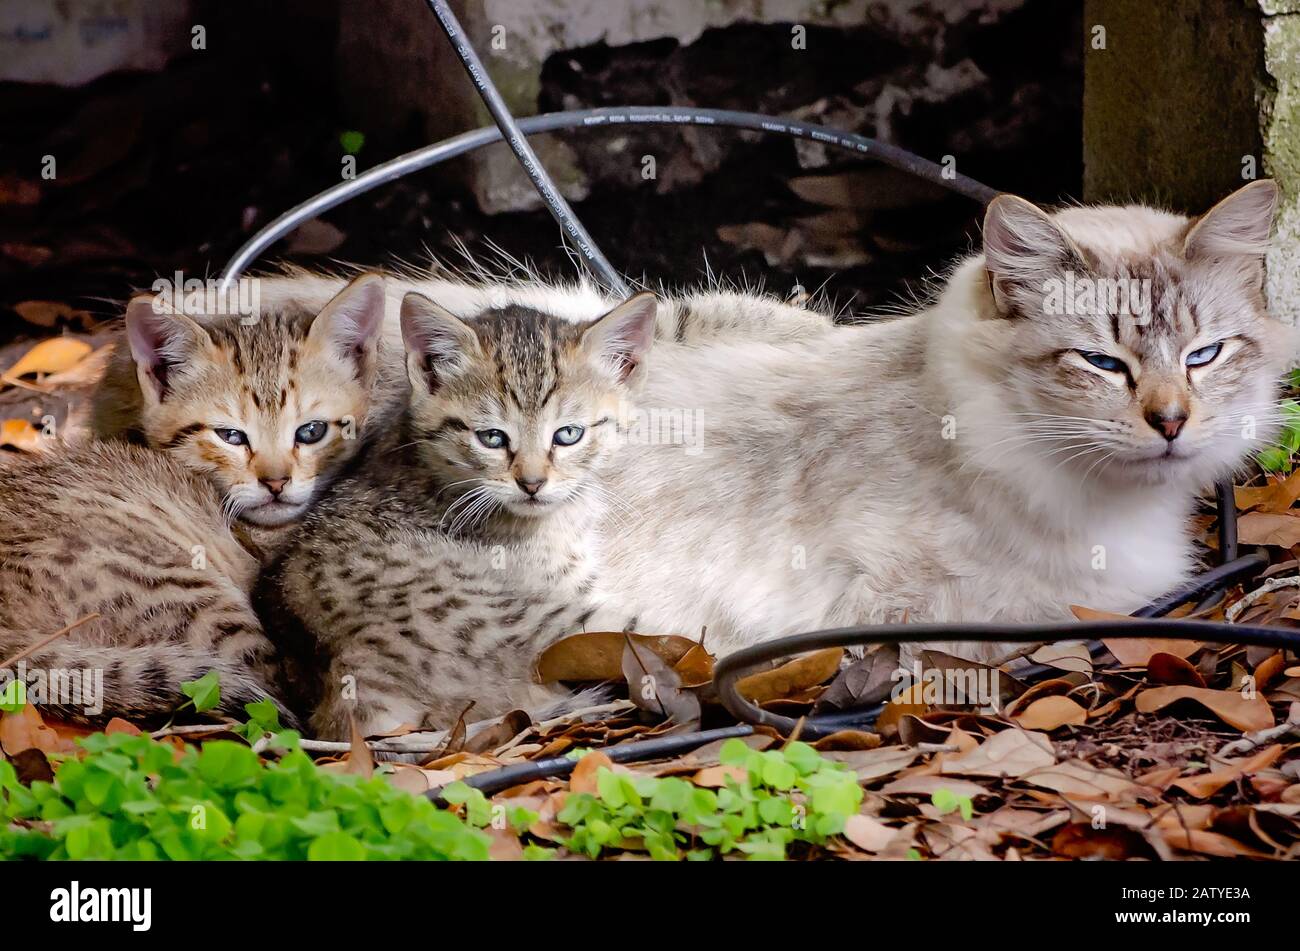 A mother cat lays beside her two six-week-old tabby kittens, Jan. 30, 2020, in Coden, Alabama. Stock Photo